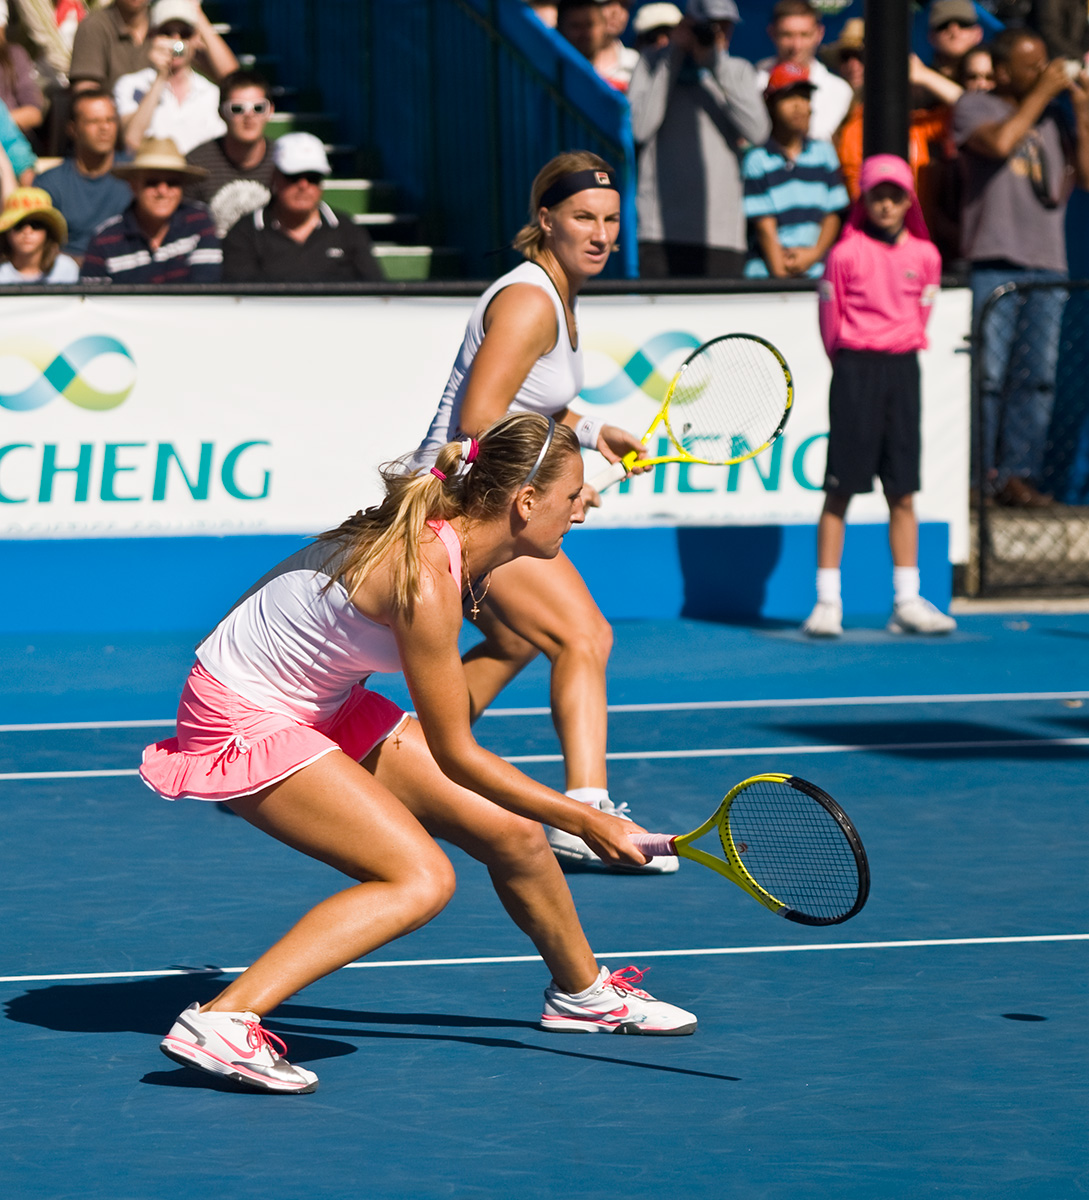 two young women on a tennis court preparing to play